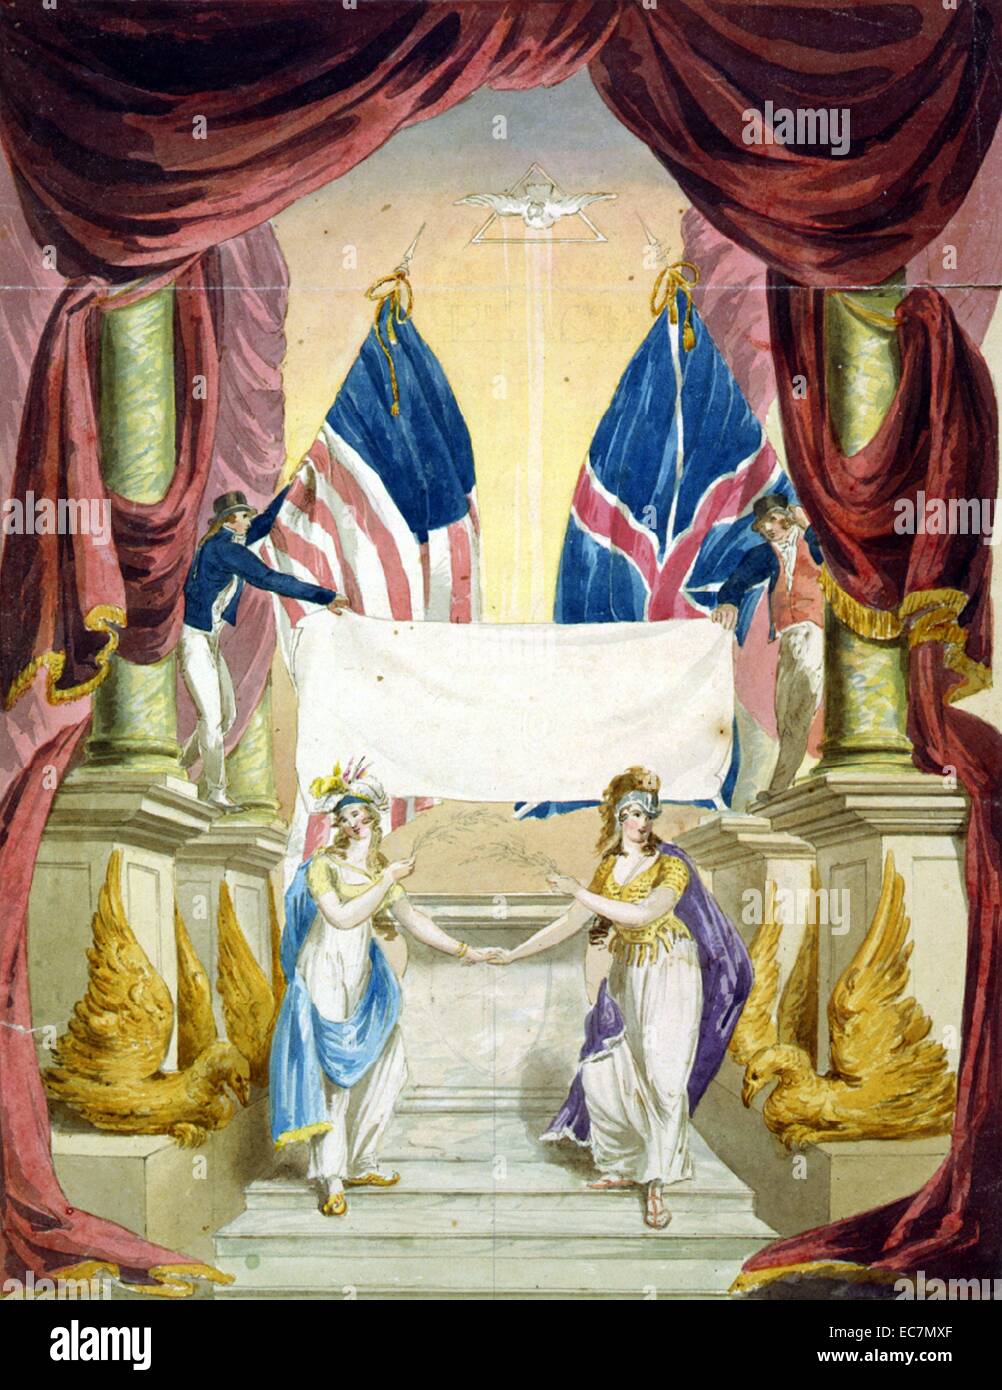 Peace. In an allegory of the Treaty of Ghent, signed on Dec. 24, 1814, Britannia and America hold olive branches before an altar. Sailors, holding British and American flags, hold an uninscribed banner. Through the drapes and pillars a dove flies out of a triangle. Stock Photo